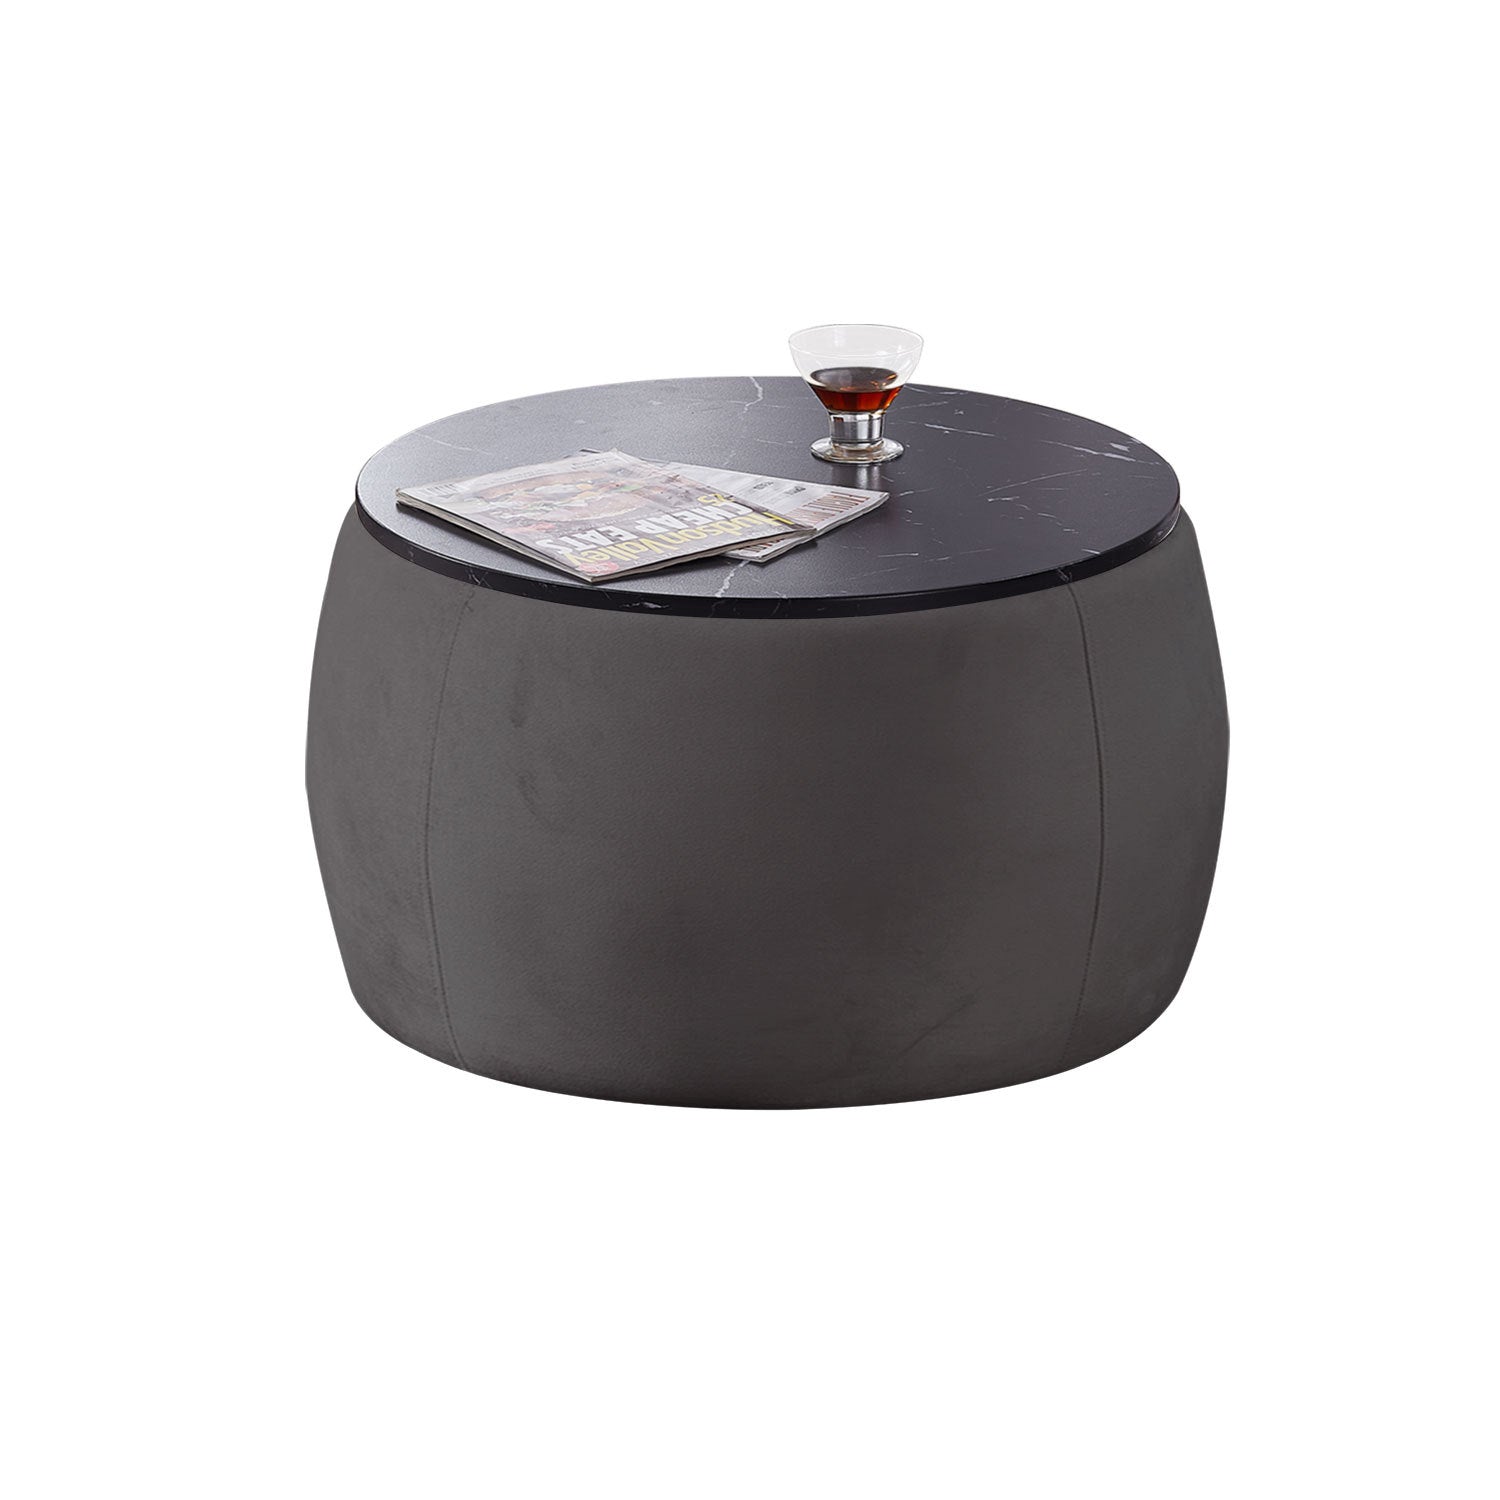 End Table with Storage, Round Accent Side Table with black-metal & wood